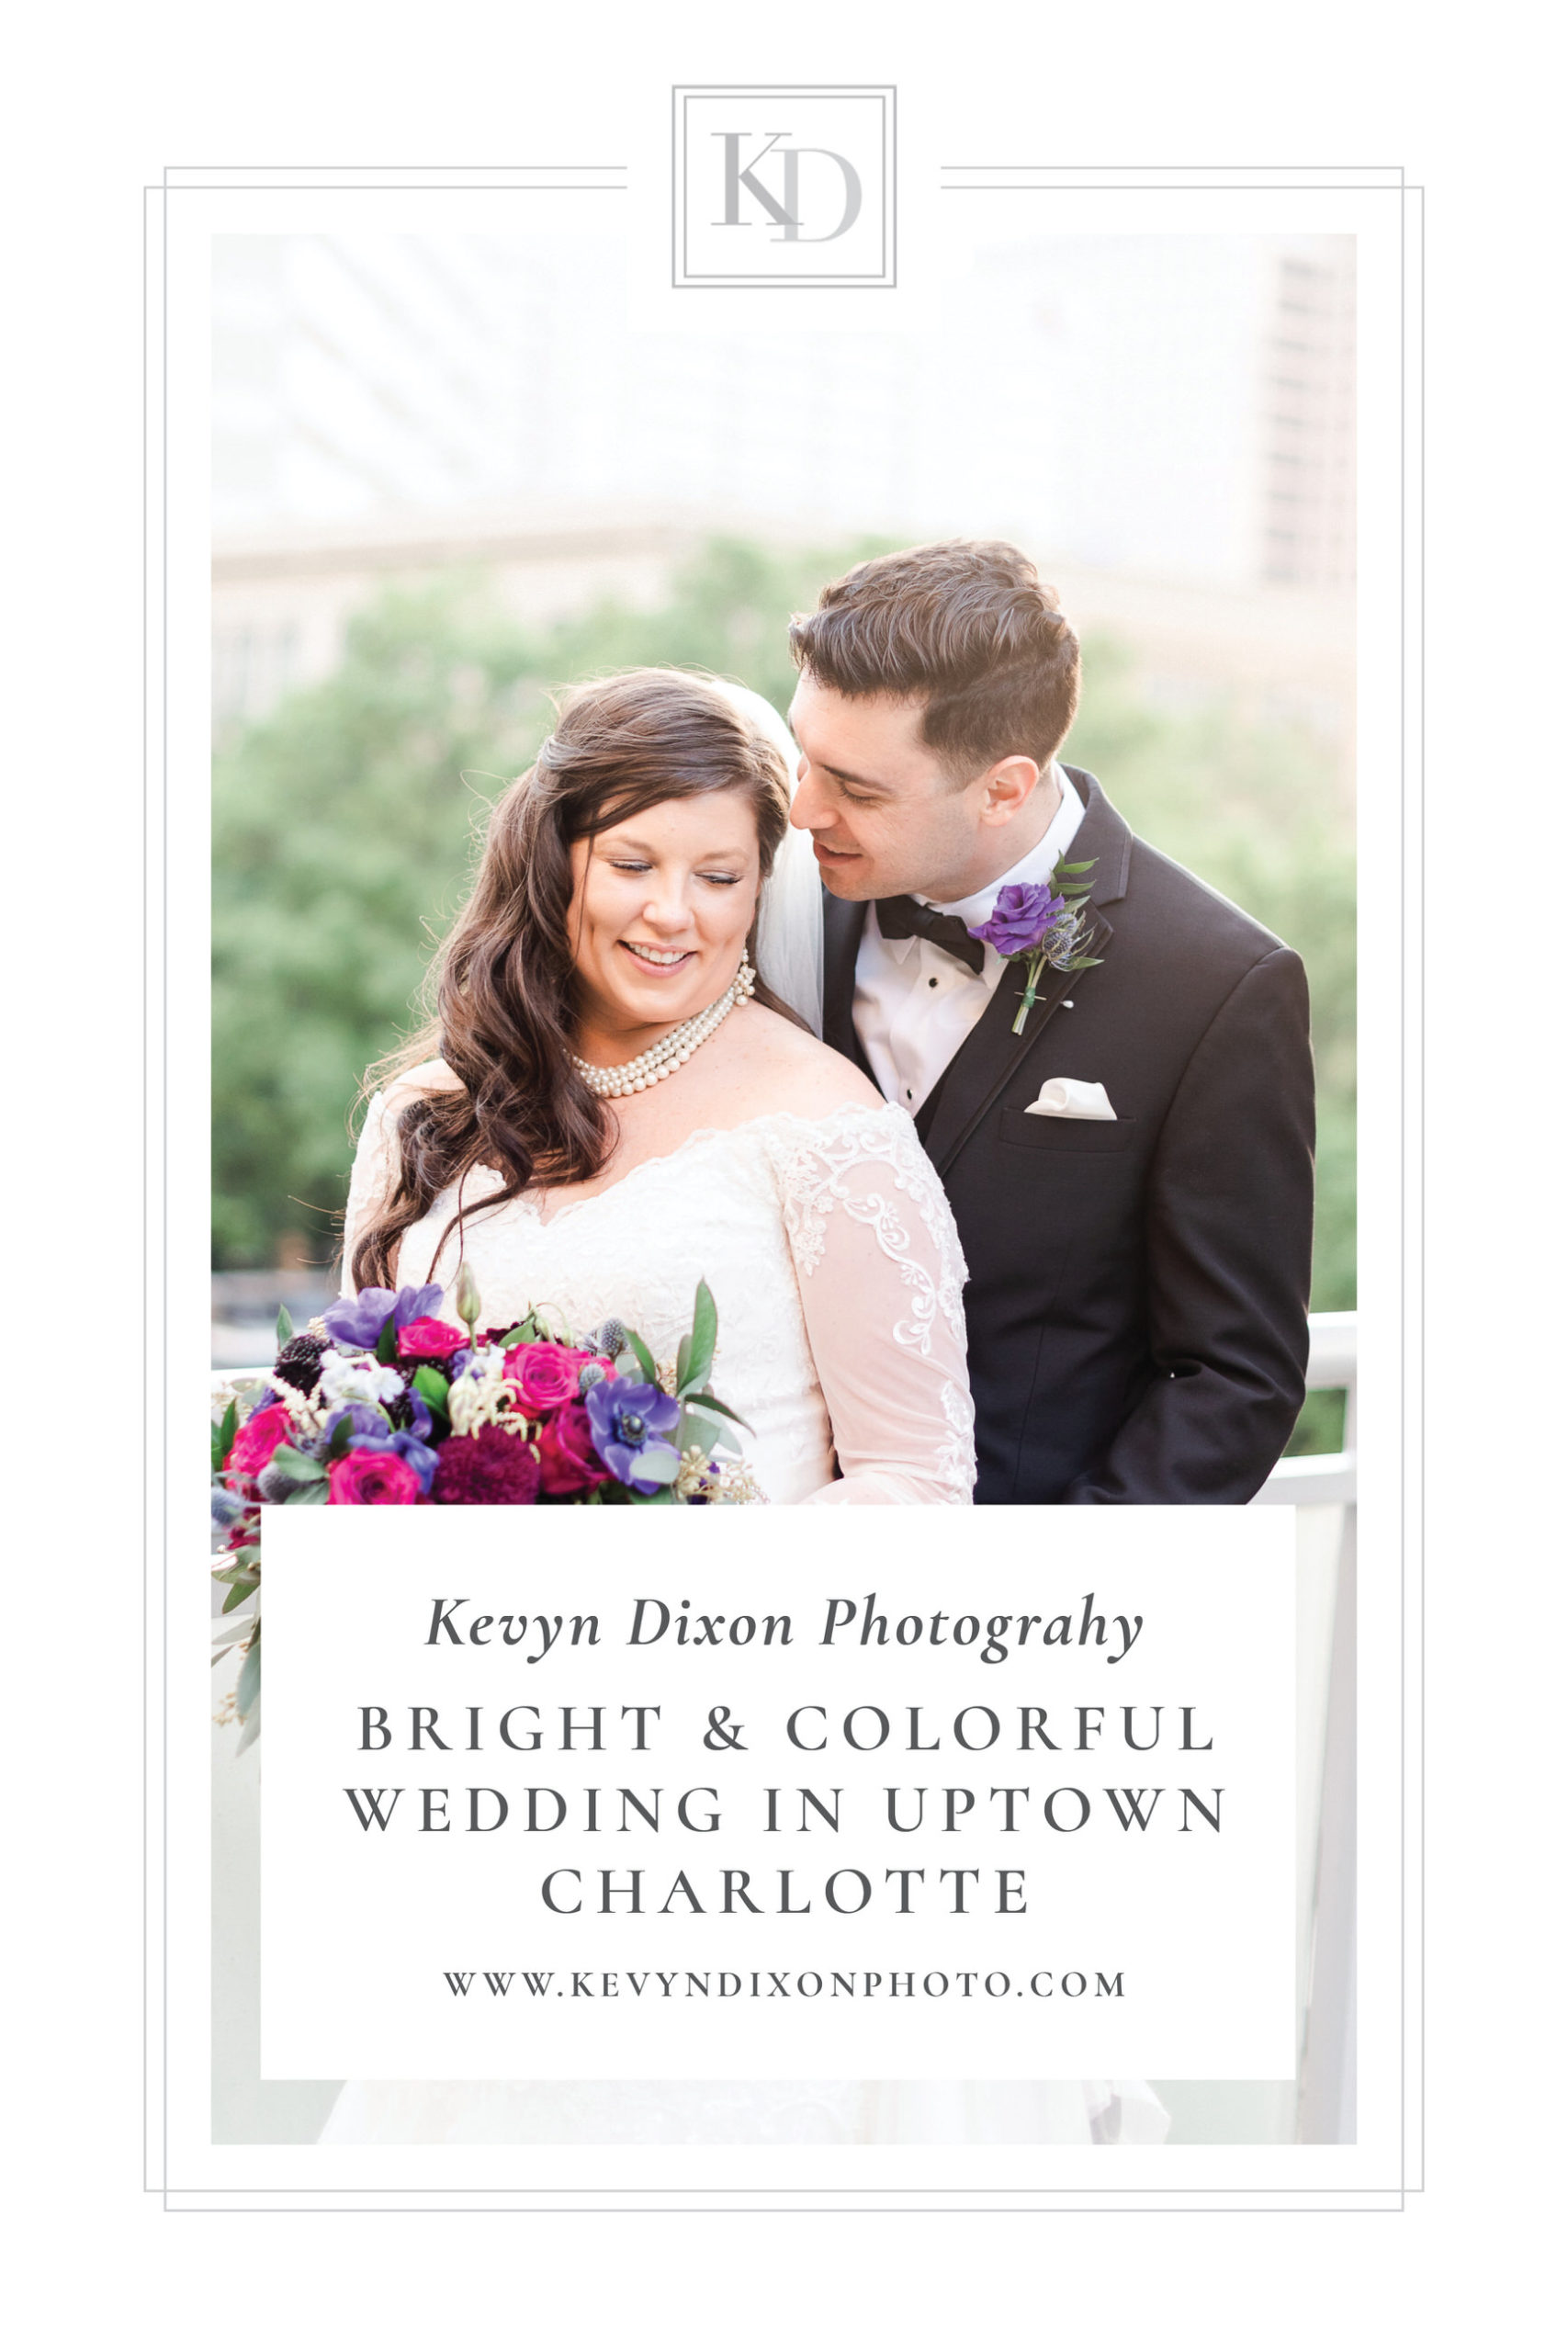 Colorful Uptown Charlotte Wedding Pin Image featuring Bride and Groom Rooftop Portrait with Skyscrapers in Background